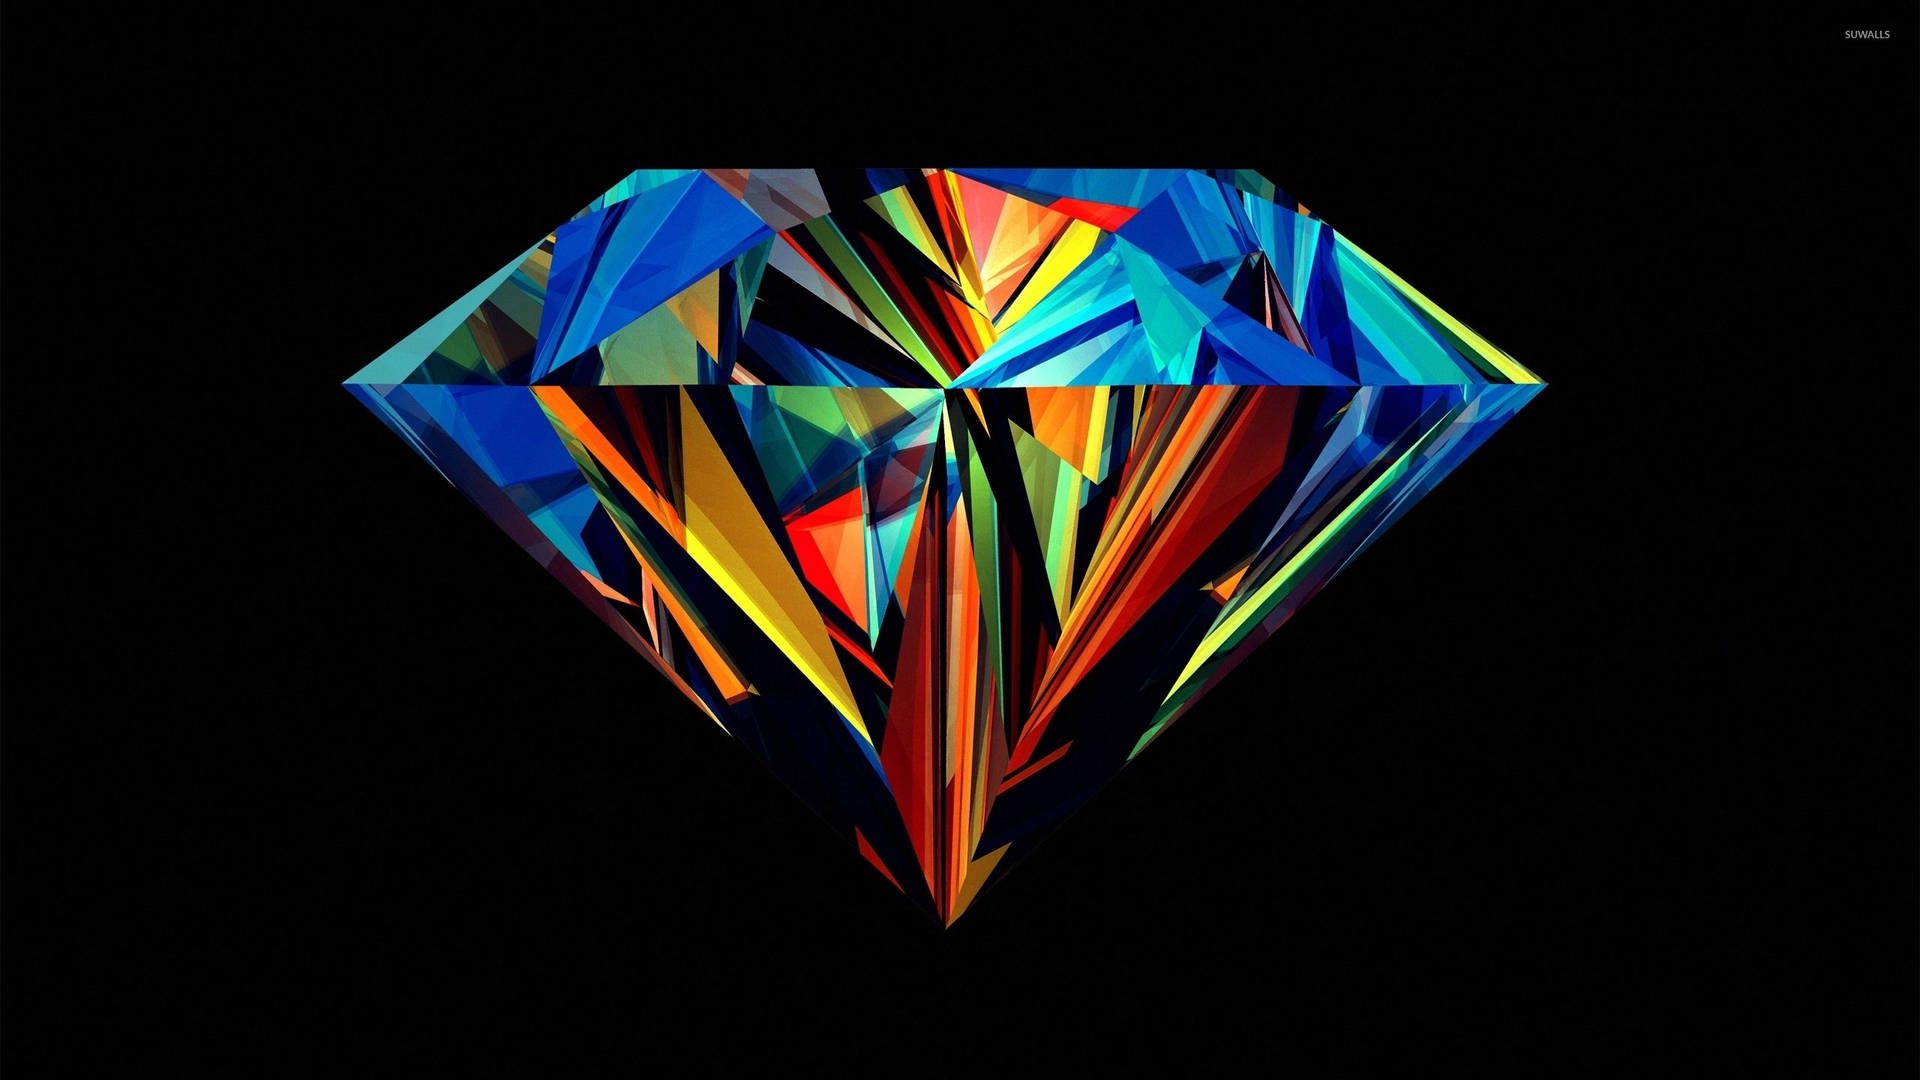 Diamond 2560X1440 Wallpaper and Background Image